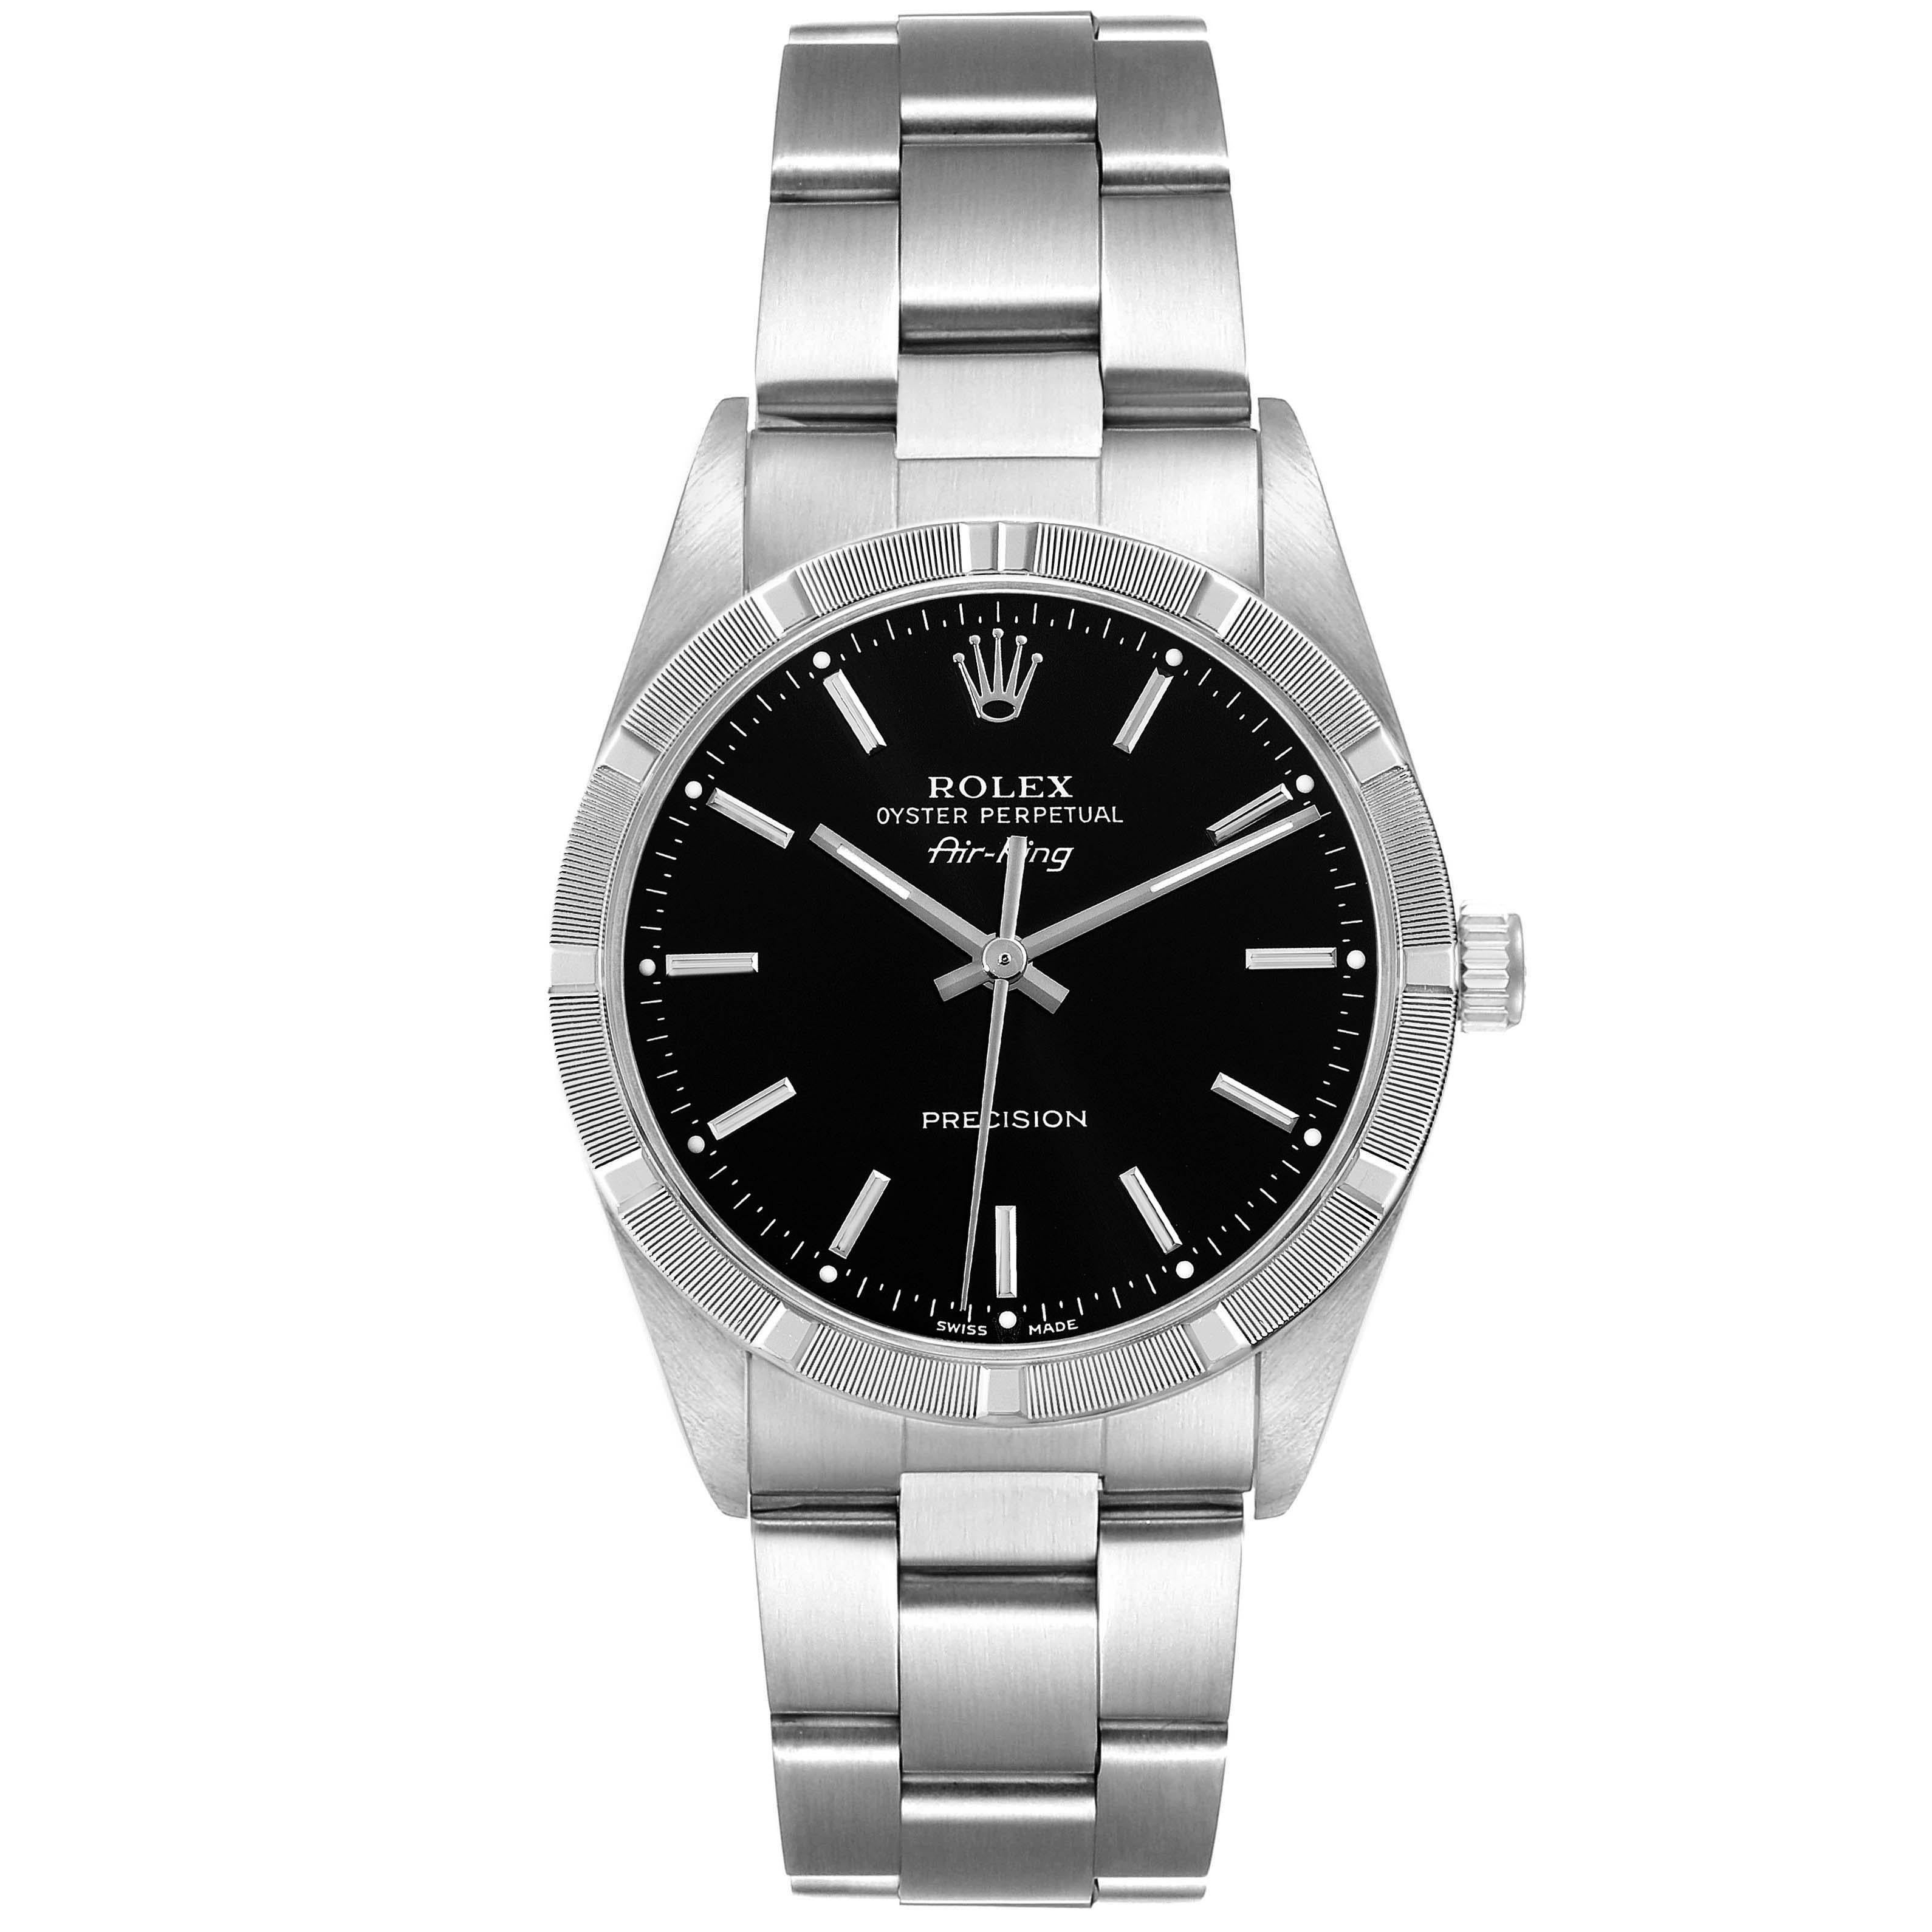 Rolex Air King Engine Turned Bezel Black Dial Steel Mens Watch 14010. Automatic self-winding movement. Stainless steel case 34.0 mm in diameter. Rolex logo on the crown. Stainless steel engine turned bezel. Scratch resistant sapphire crystal. Black